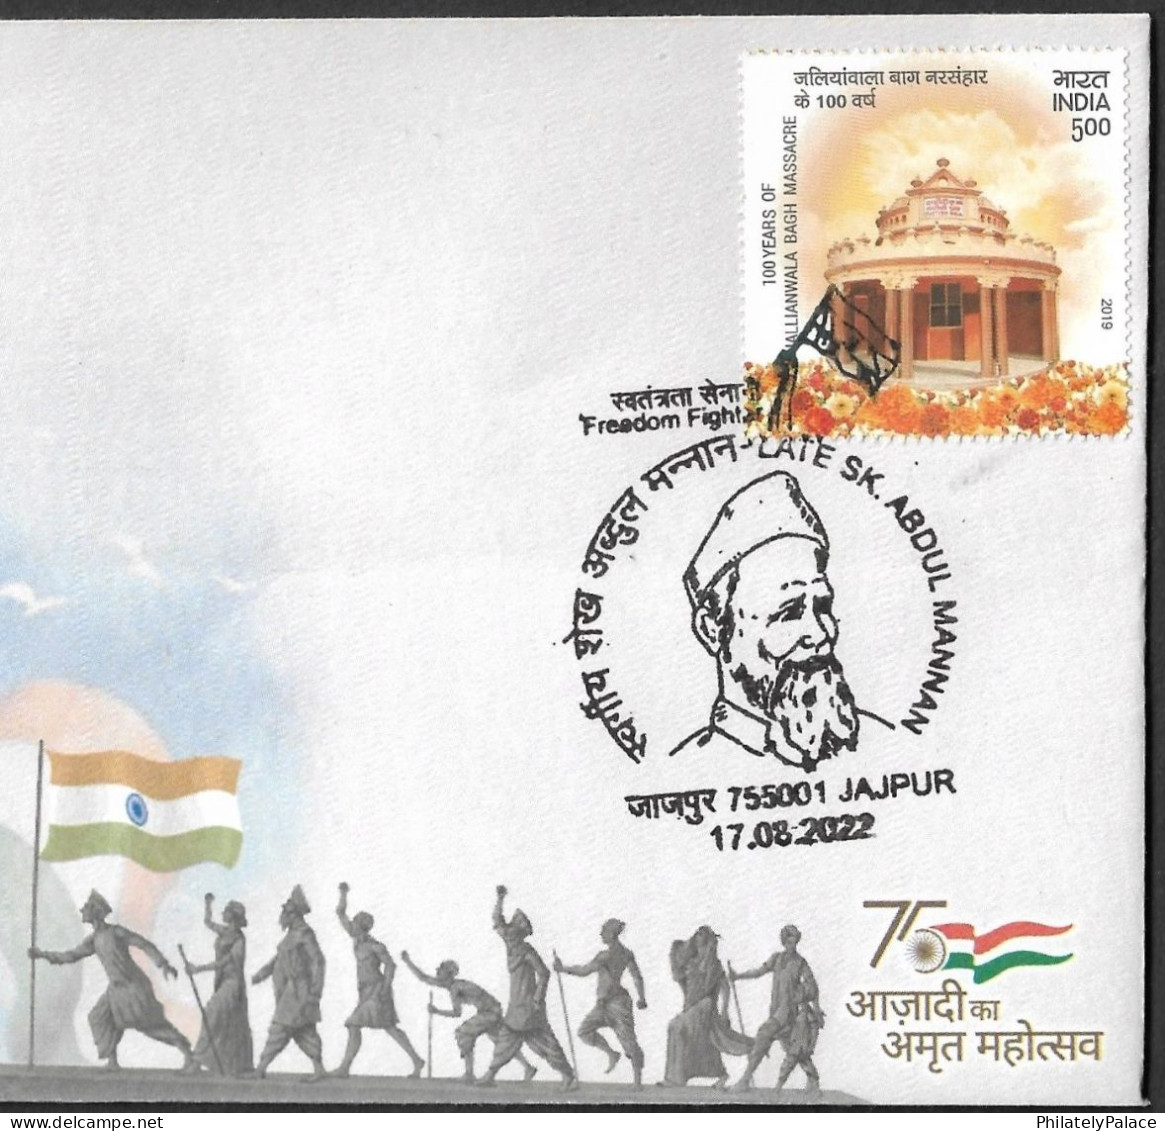 India 2022 Late Sk.Abdul Mannan,Freedom Fighter,Flag,Indira Gandhi,Independence,Muslim,Sp Cover (**) Inde, Indien - Covers & Documents